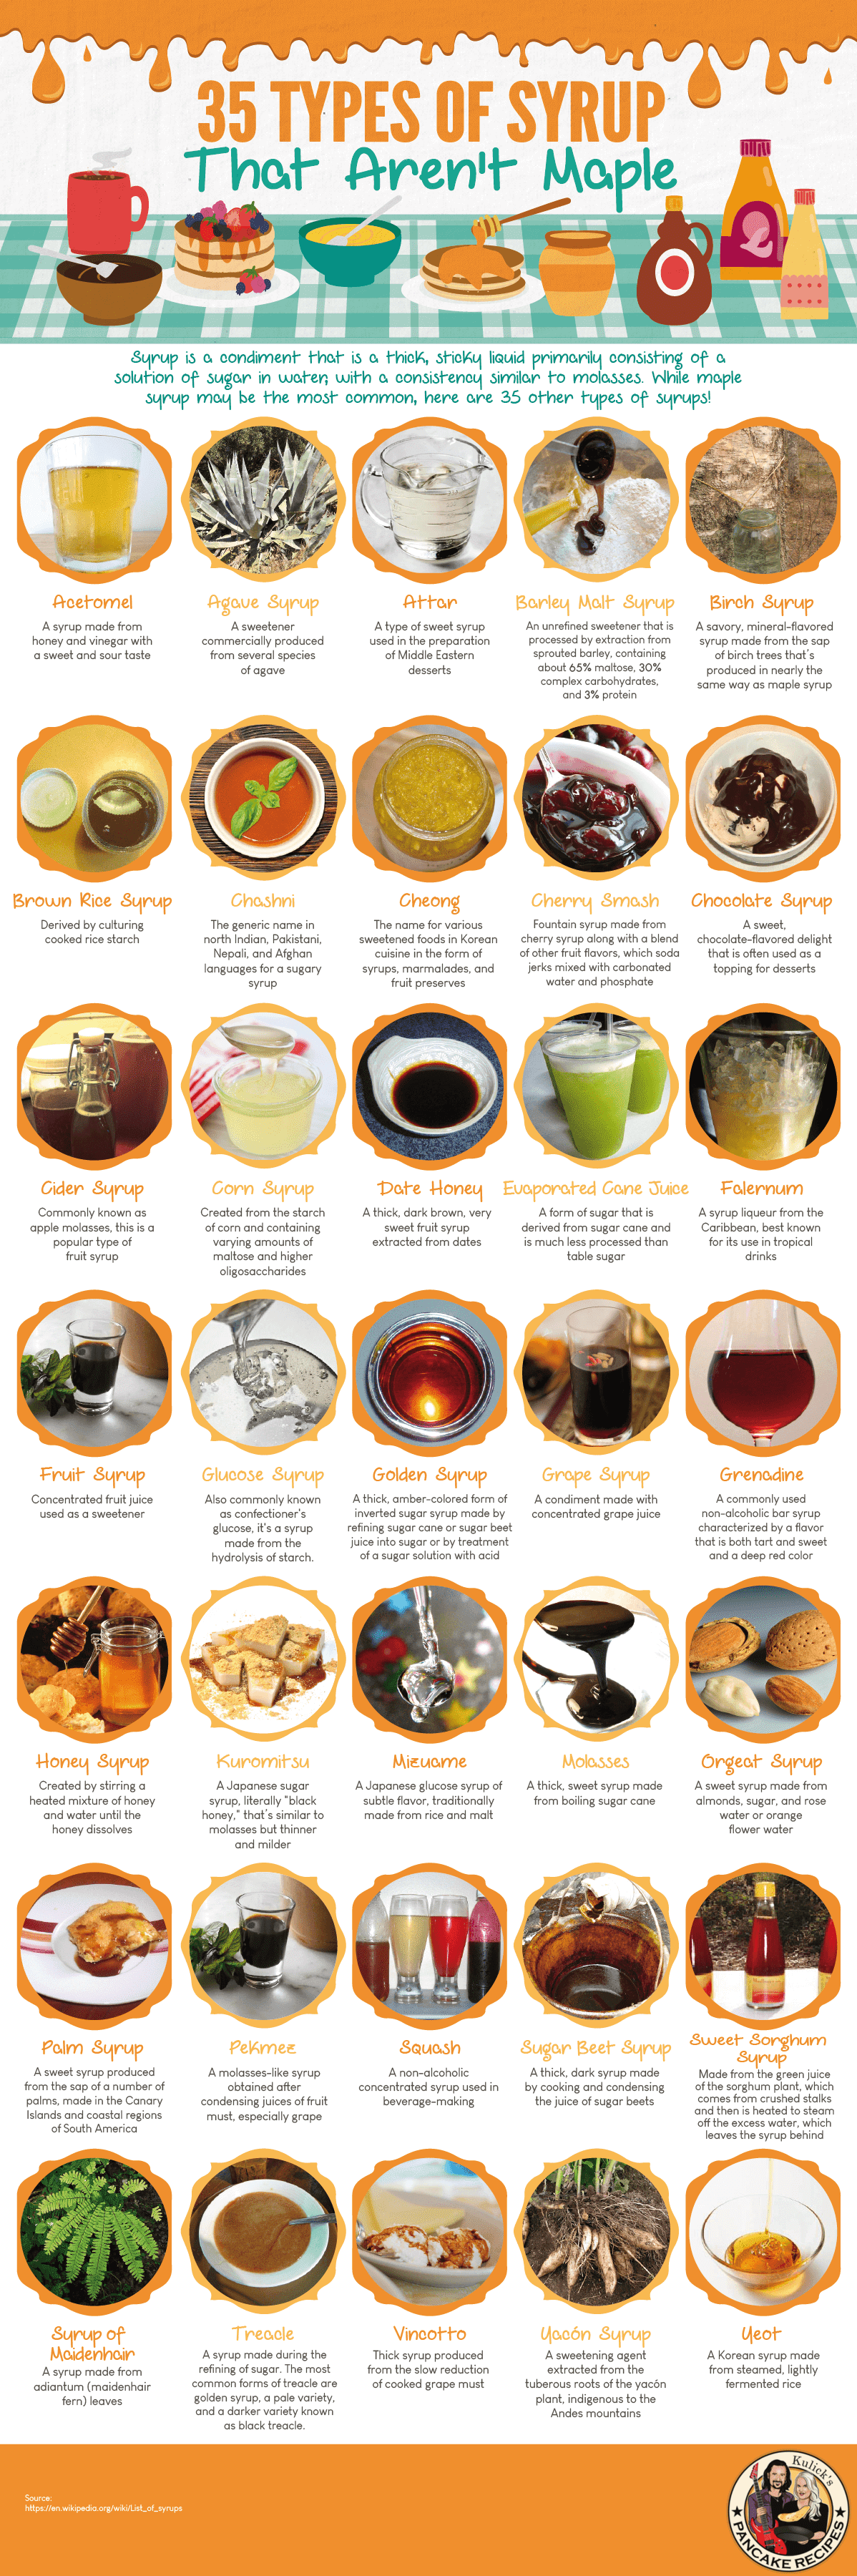 35 Types of Syrup that Aren’t Maple